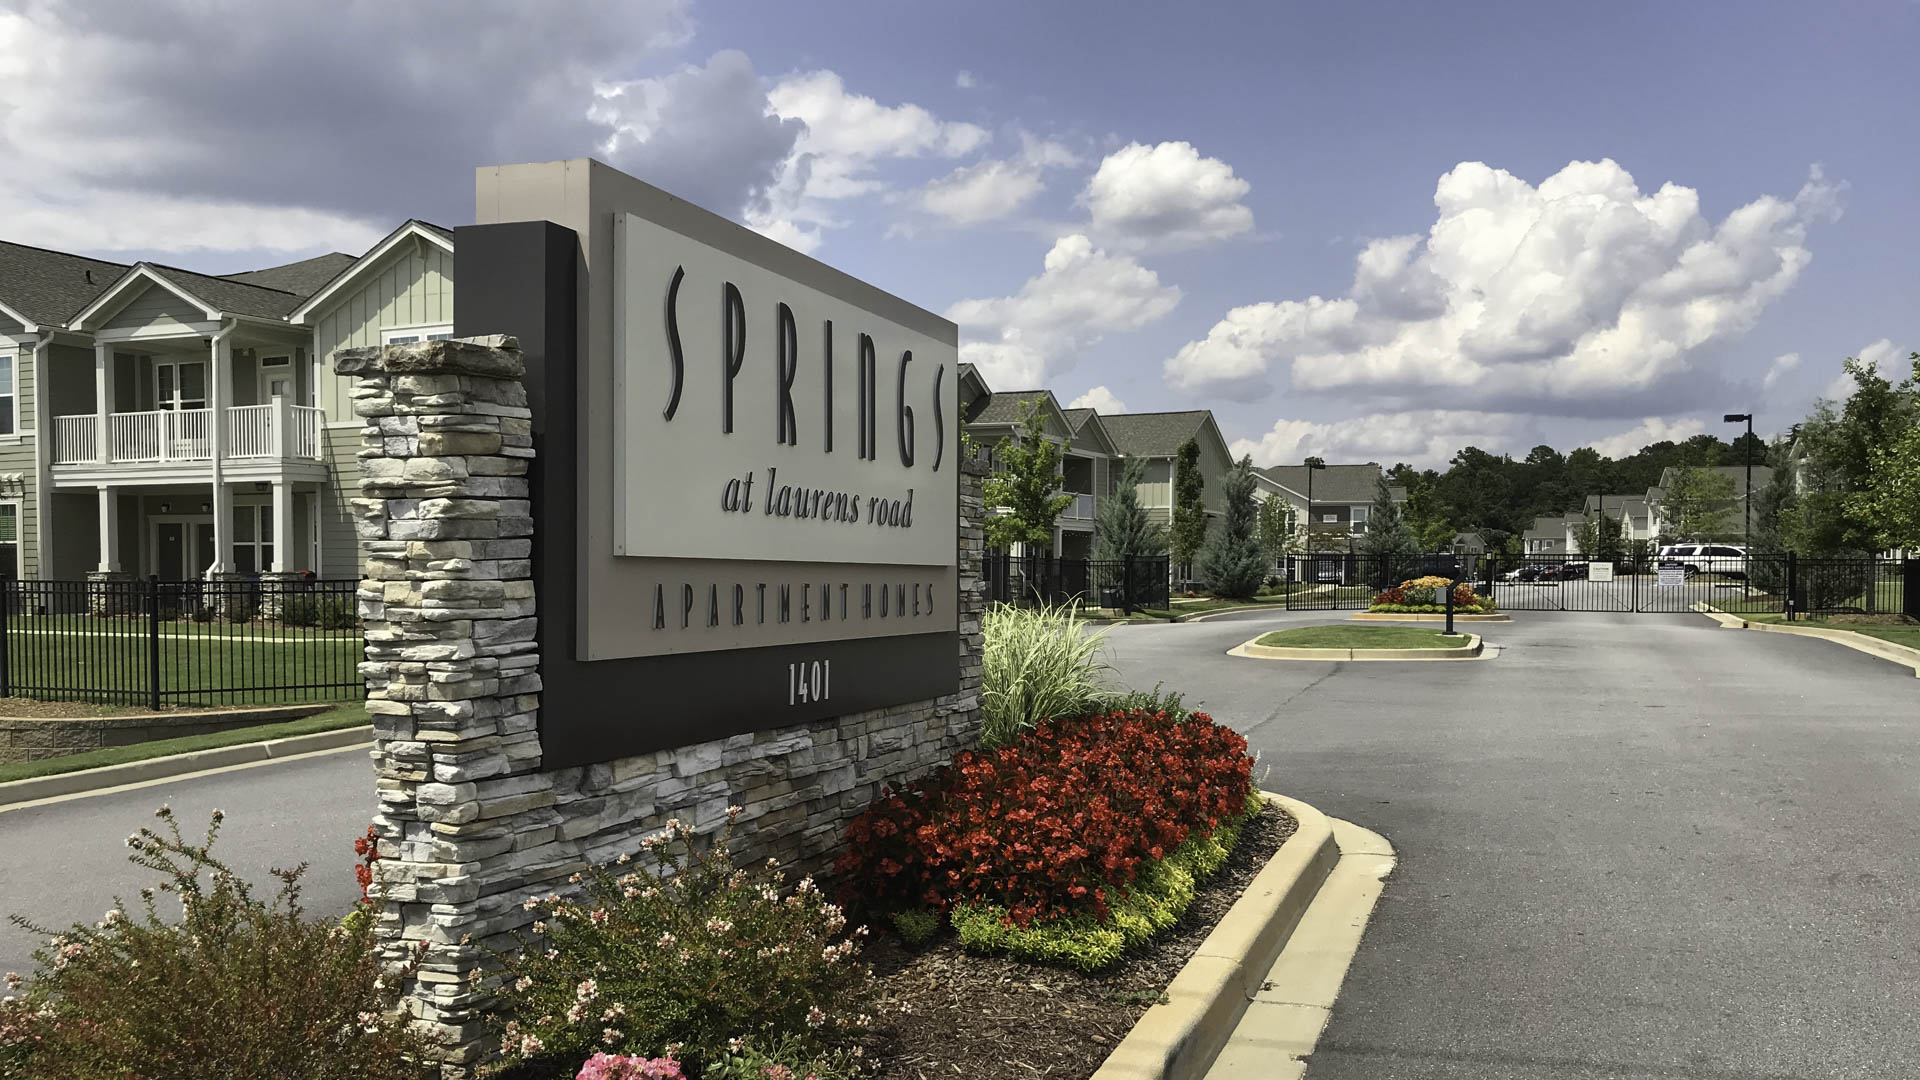 Springs at Laurens Road sign and apartment exteriors